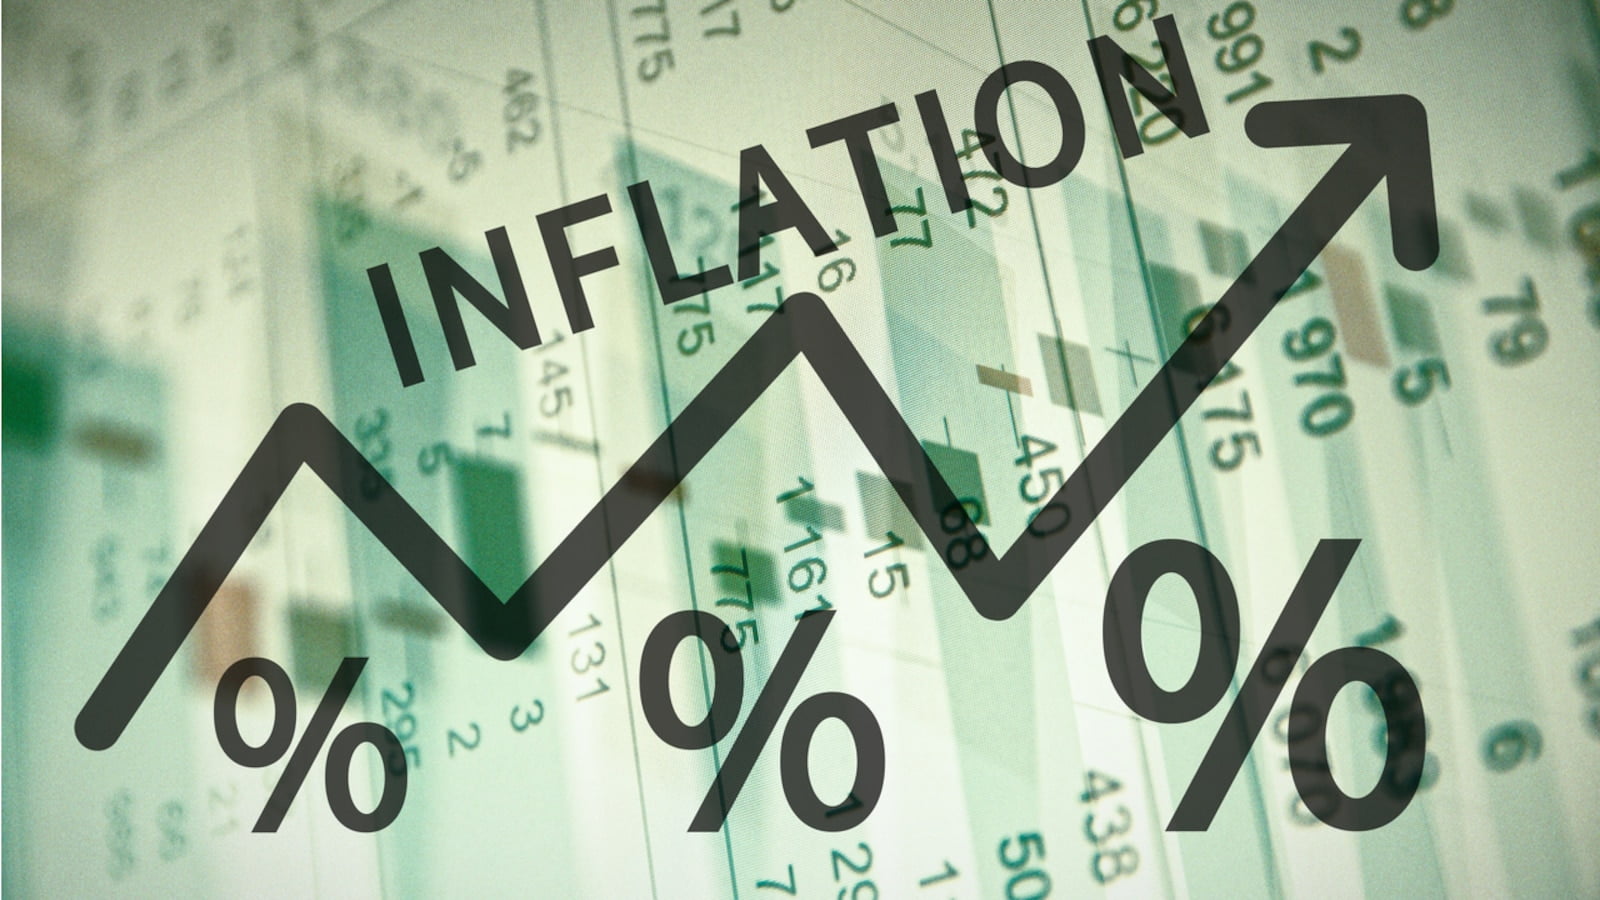 retail inflation soars to 7% in august and 2.4% in july, according to the cpi inflation rate for that month in 2022.